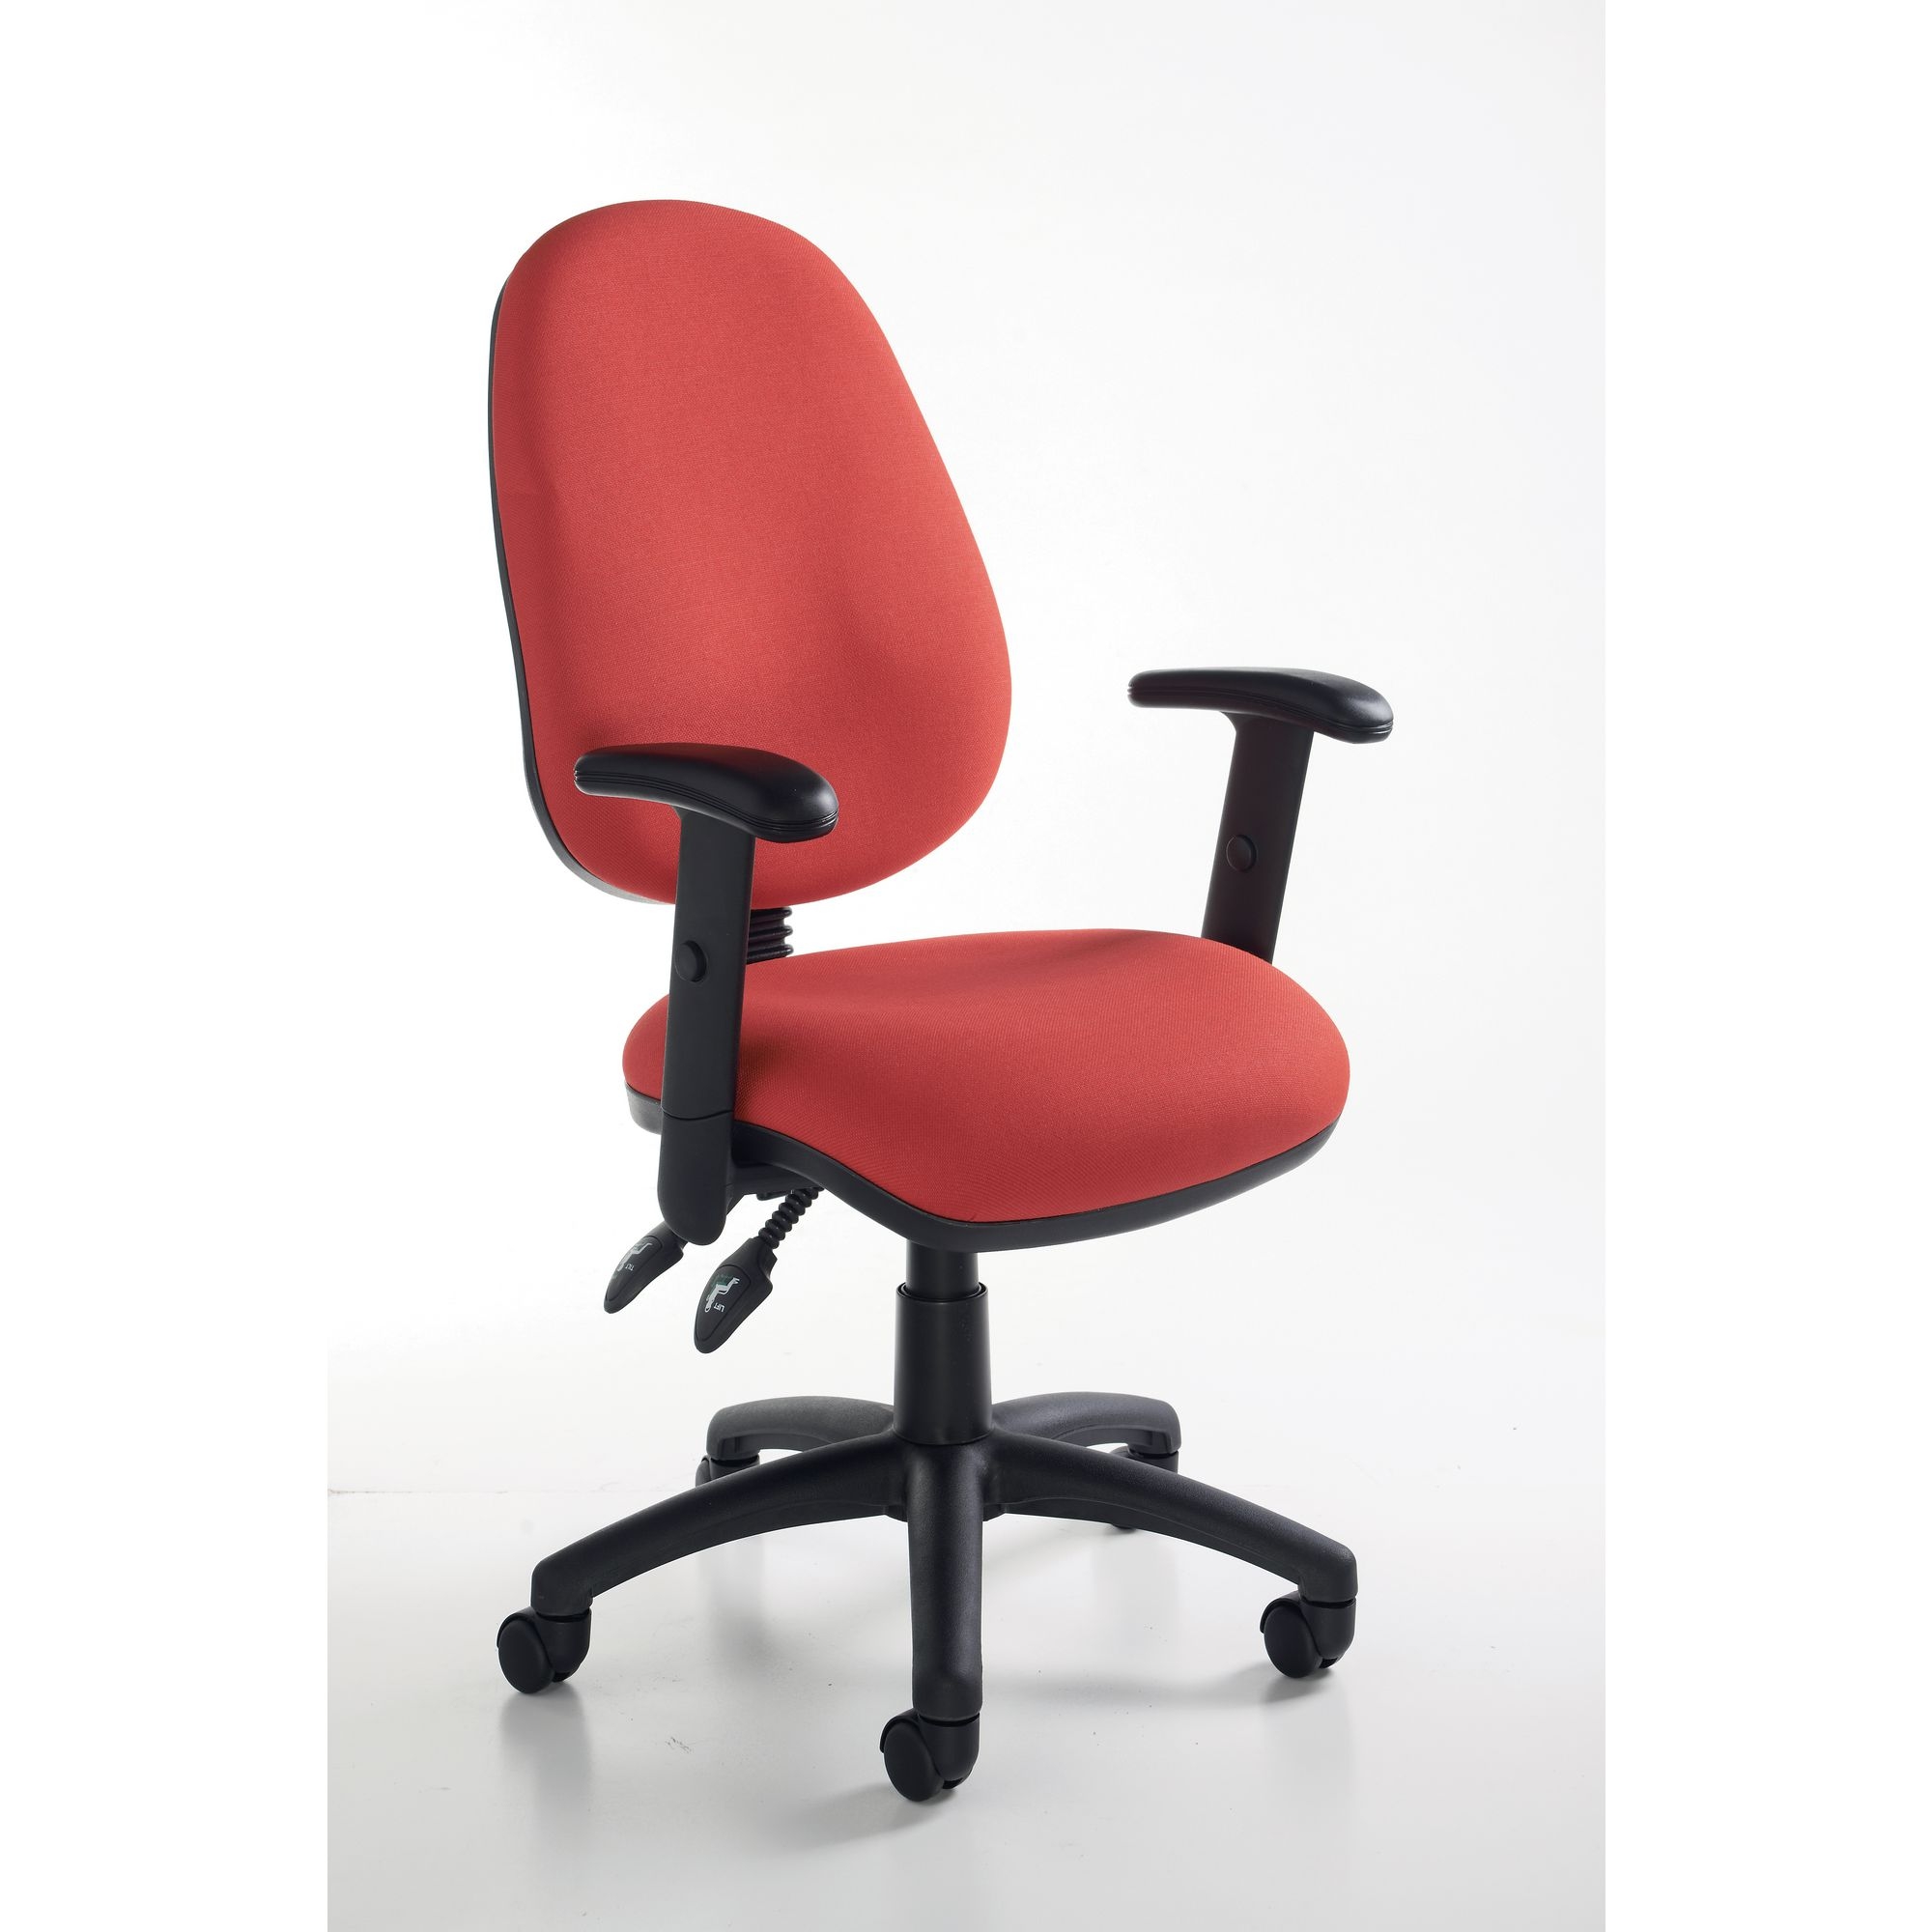 Operator Chair Adjustable Arms - Red